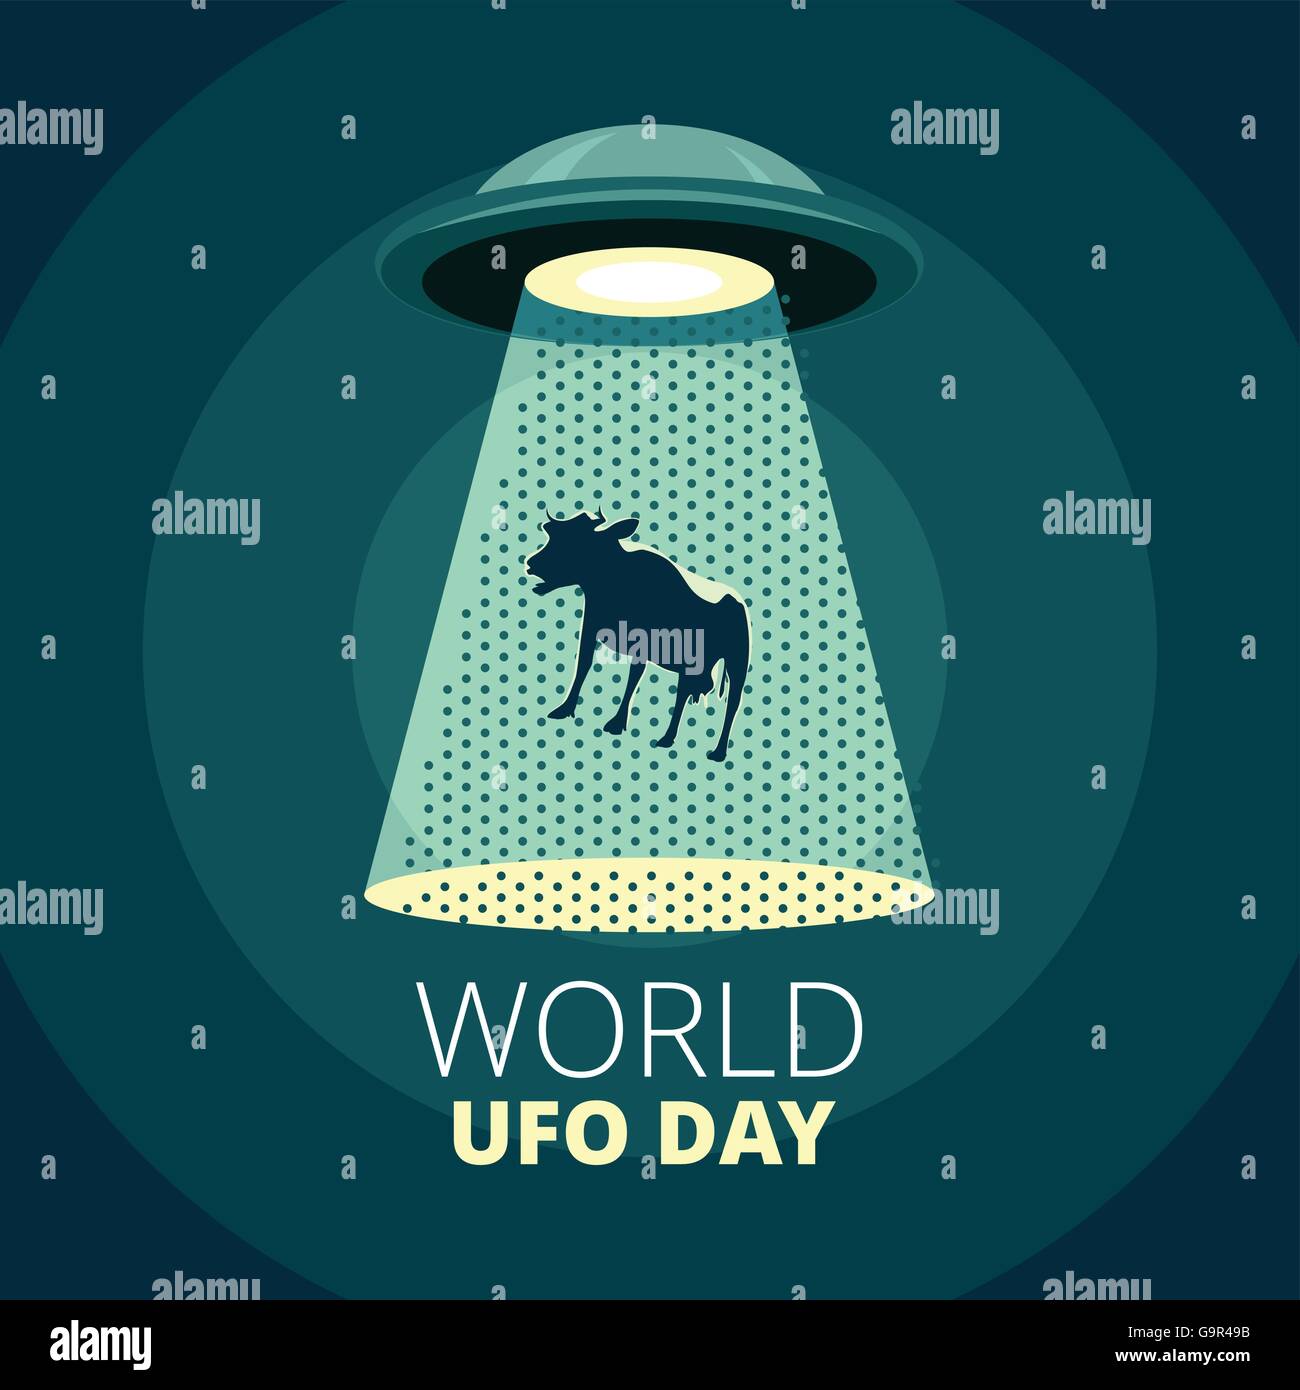 World UFO Day. Flying saucer catching a cow. Stock Vector